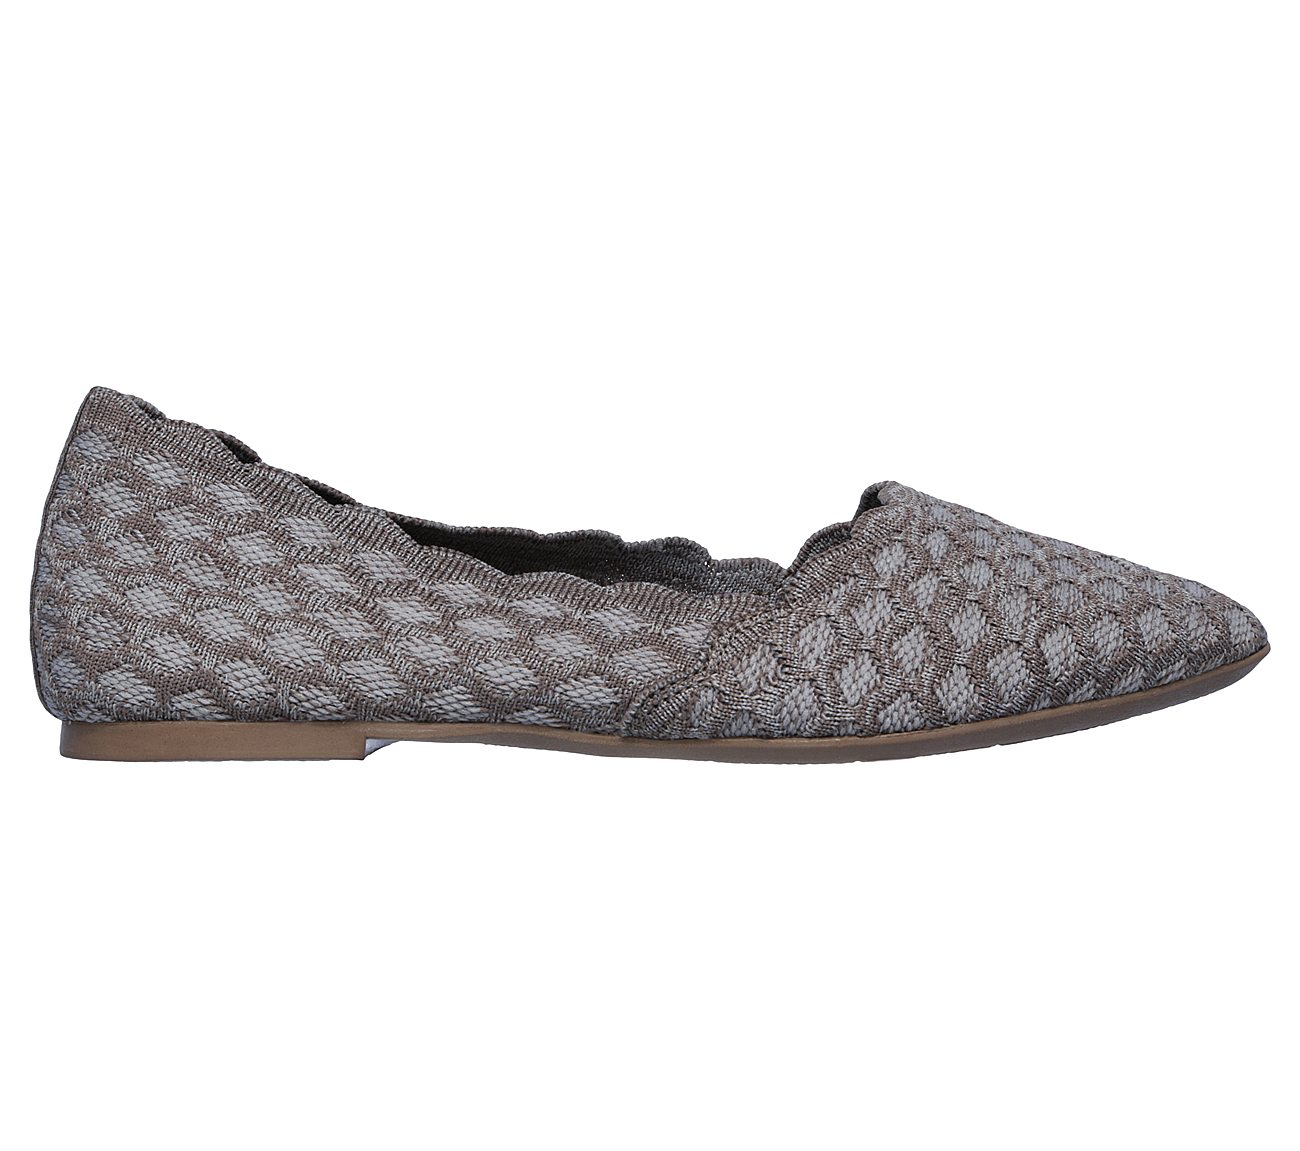 CLEO - HONEYCOMB, DARK TAUPE Footwear Lateral View